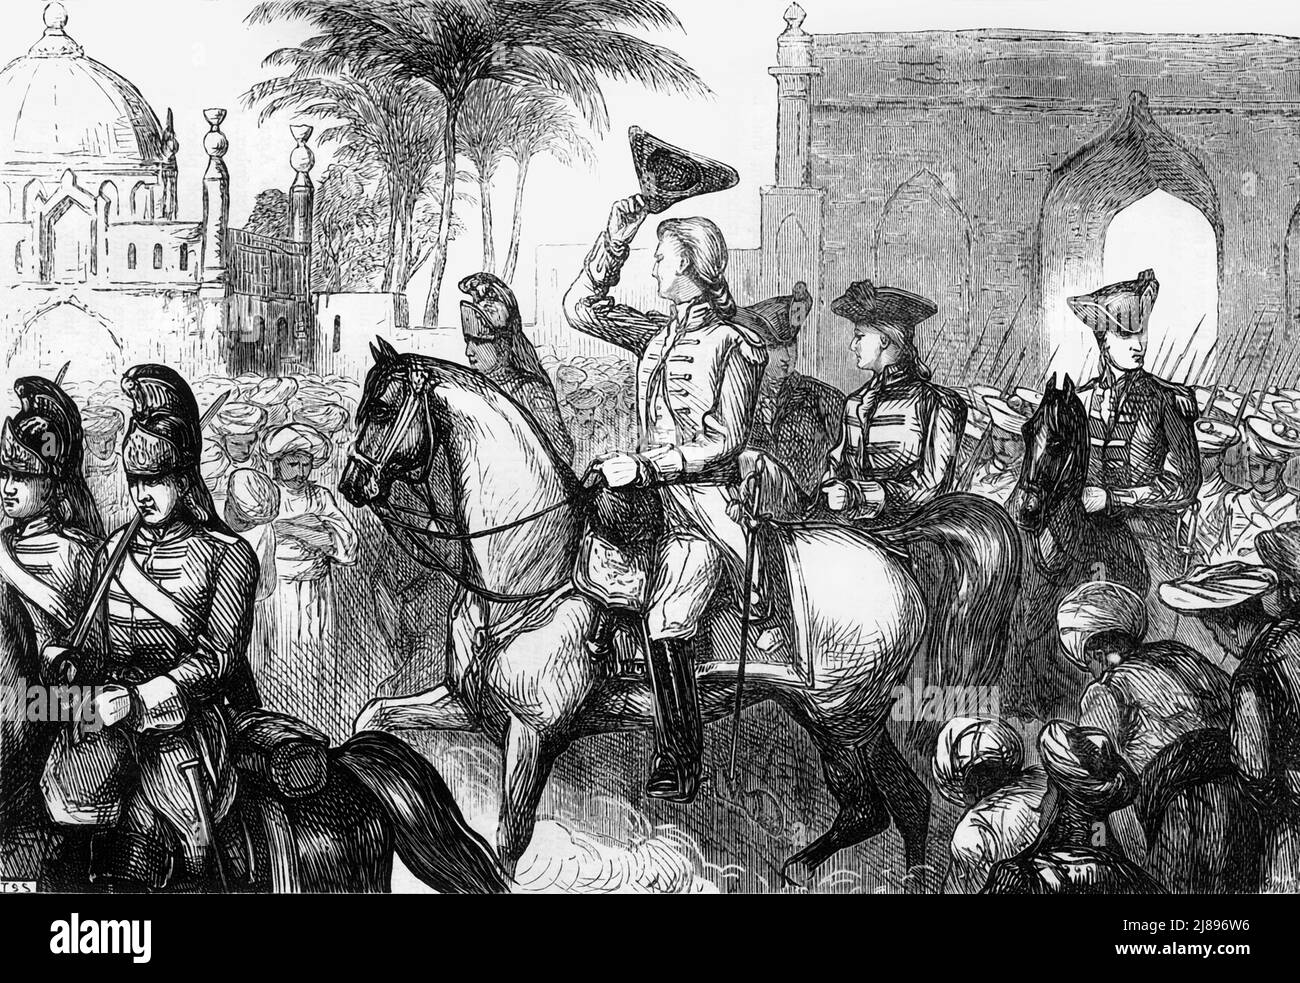 'General Goddard Entering Surat', c1891. From &quot;Cassell's Illustrated History of India Vol. I.&quot;, by James Grant. [Cassell Petter &amp; Galpin, London, Paris and New York] Stock Photo